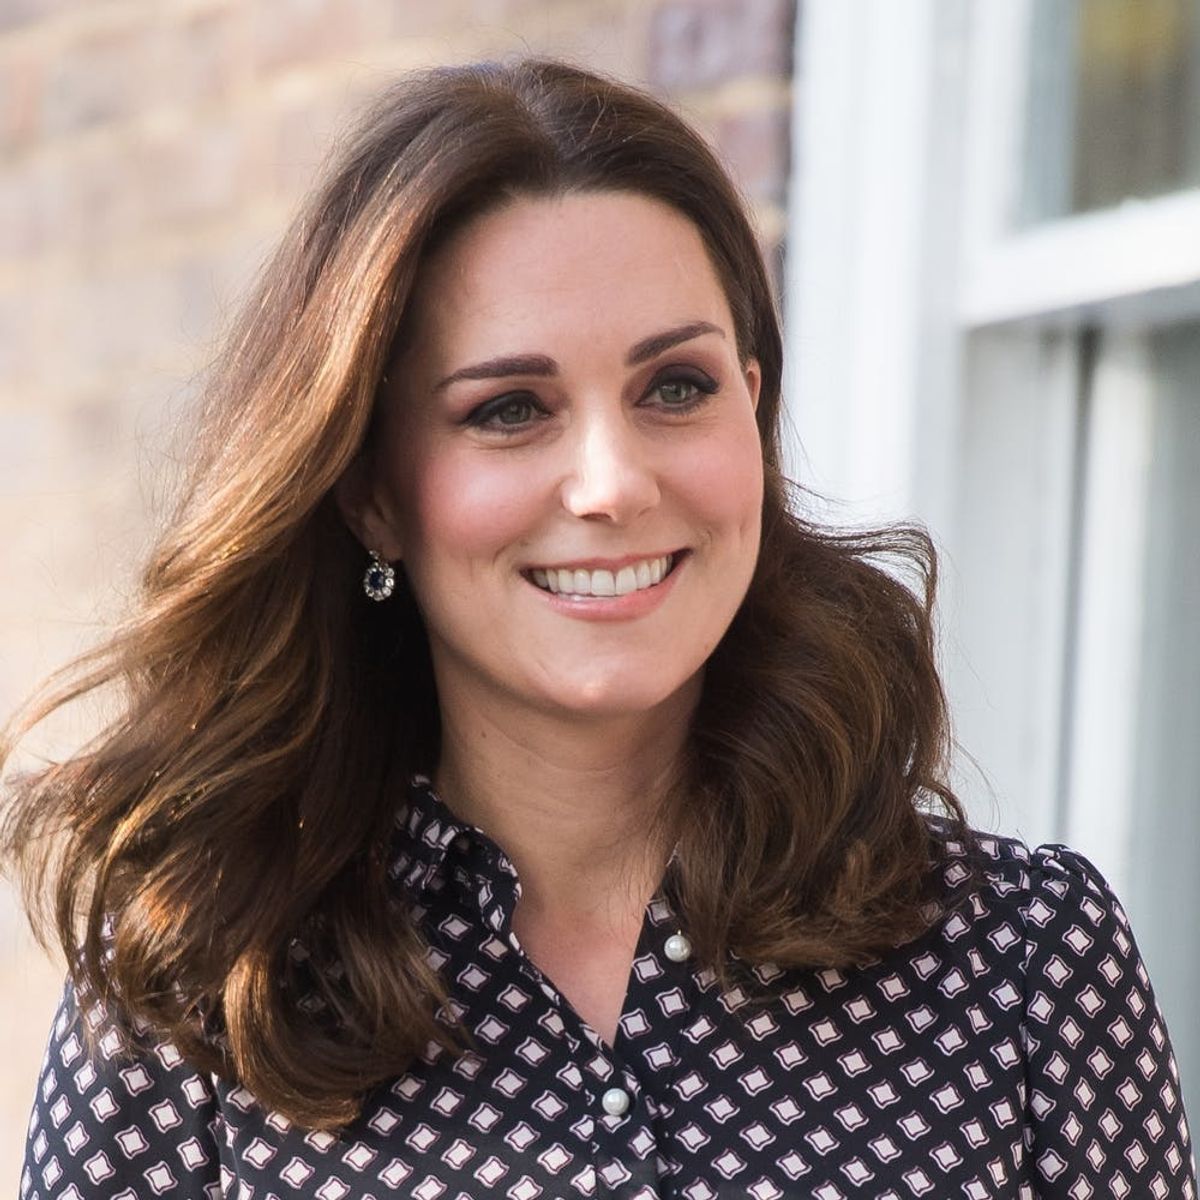 Kate Middleton’s Chic Fall Jacket Is Totally Accessible to Non-Royals